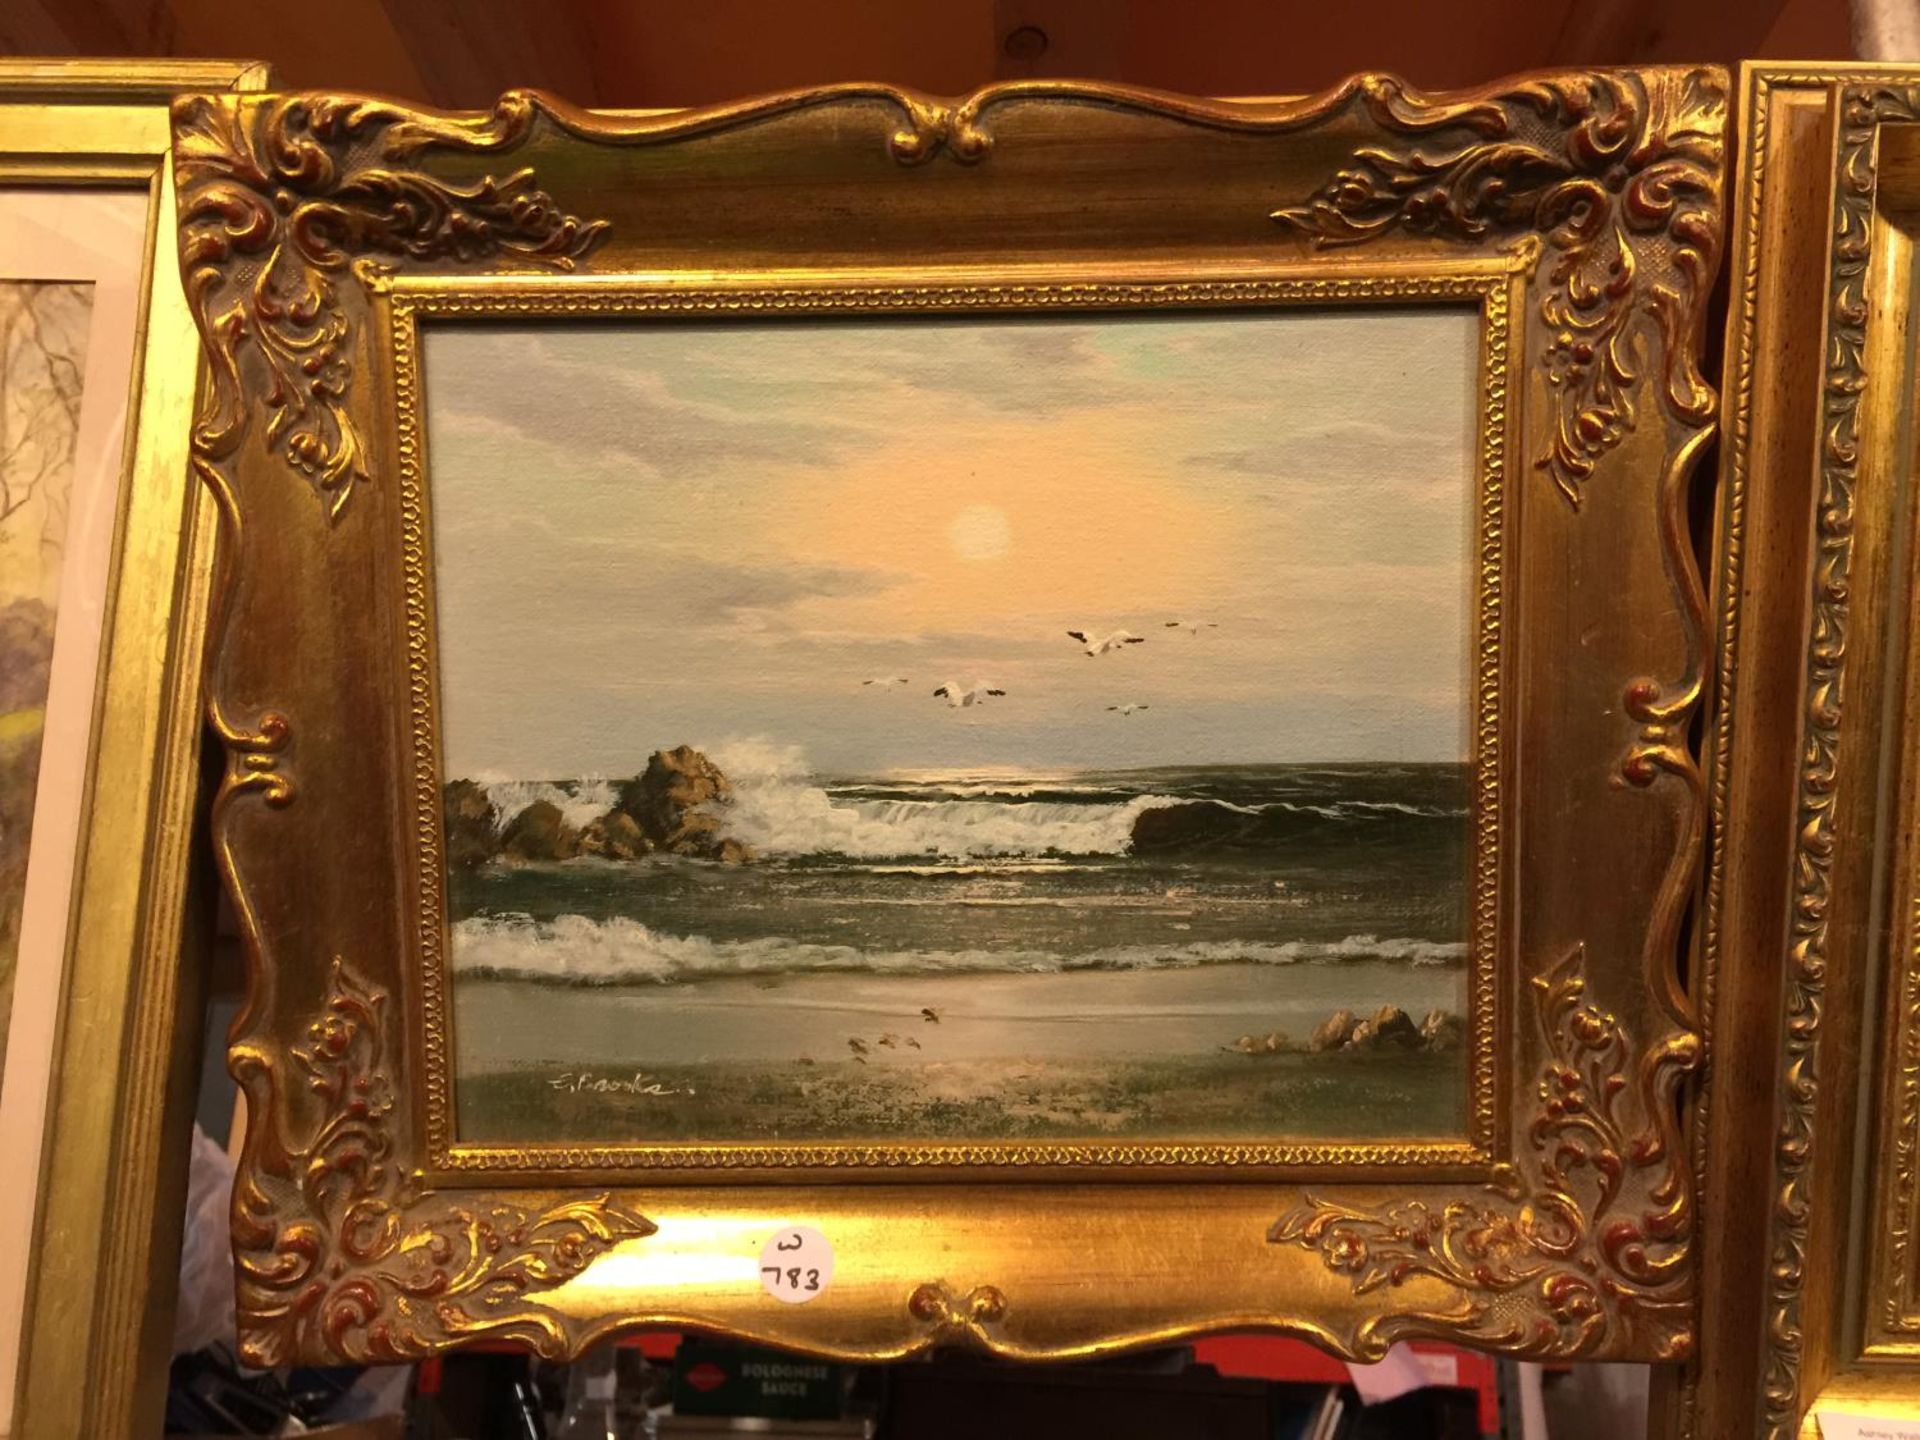 TWO GILT FRAMED OIL ON CANVAS PAINTINGS OF HENS AND A SEA SCAPE - Image 2 of 4